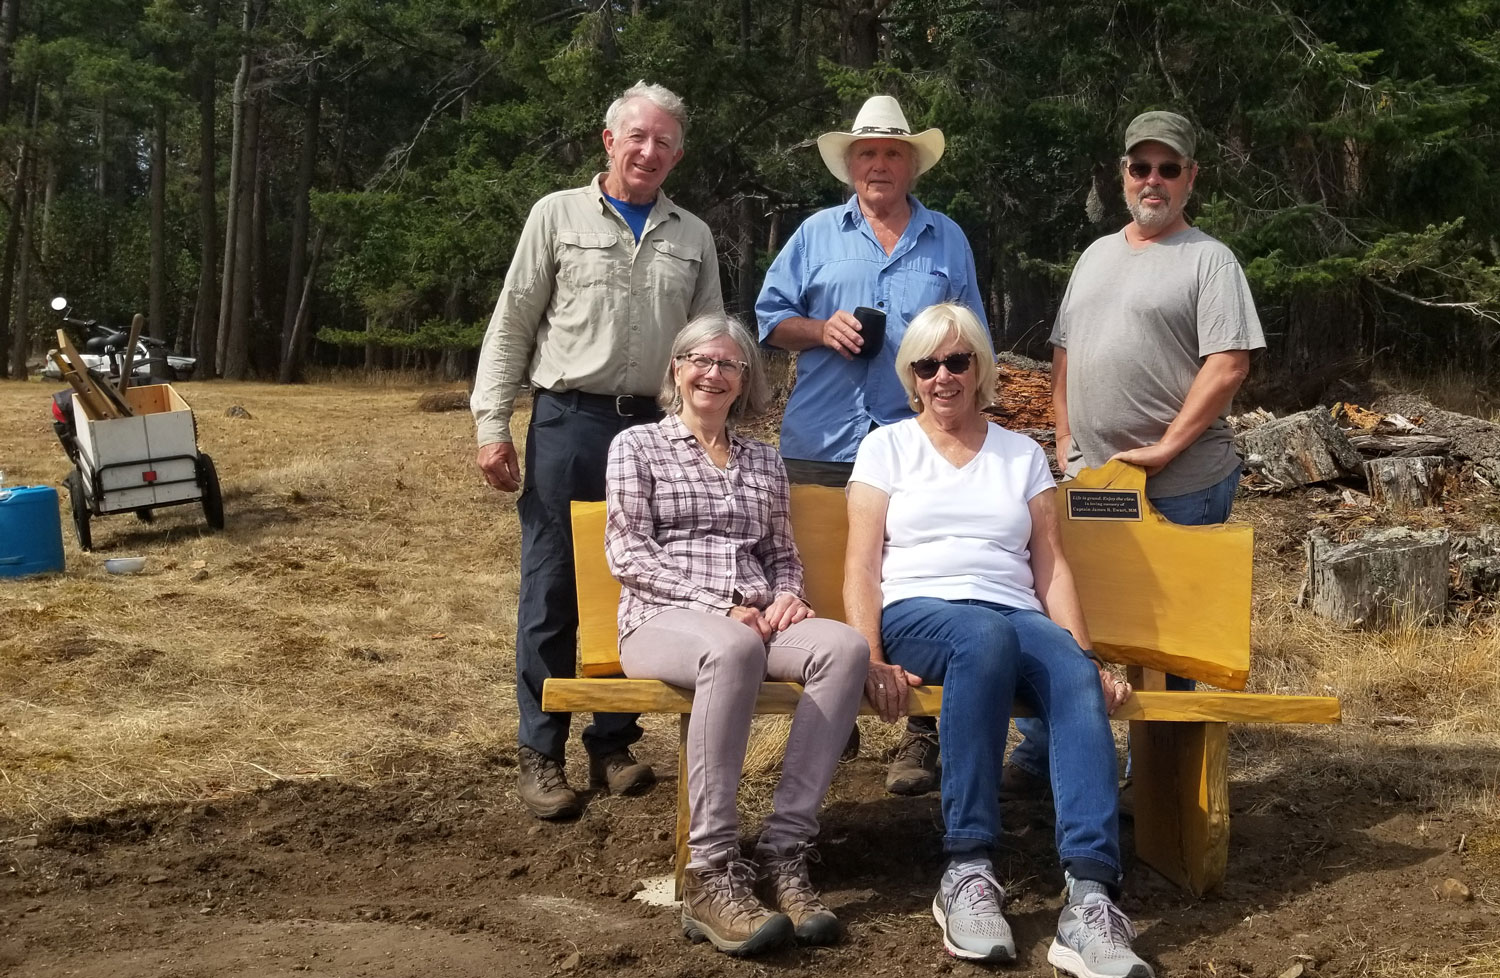 group of people with a handcrafted wooden memorial bench